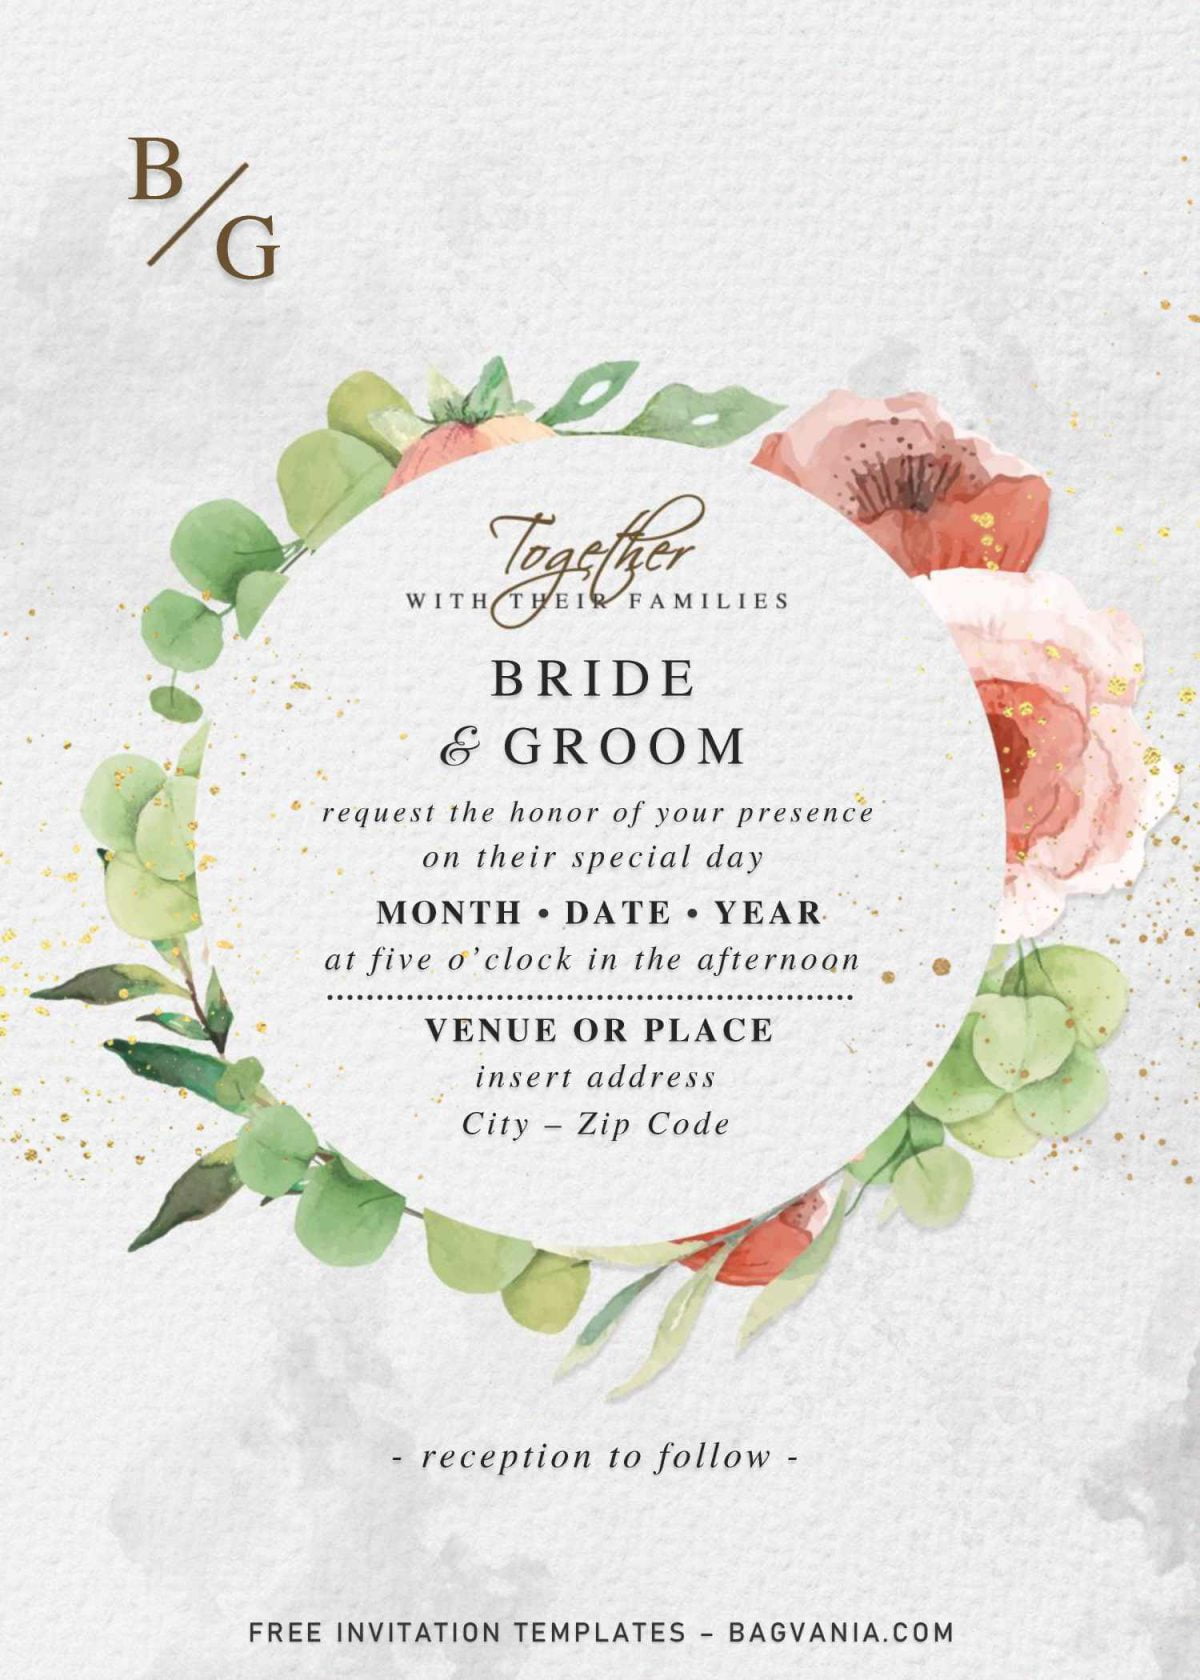 Free Vintage Floral Wedding Invitation Templates For Word and has custom floral wreath